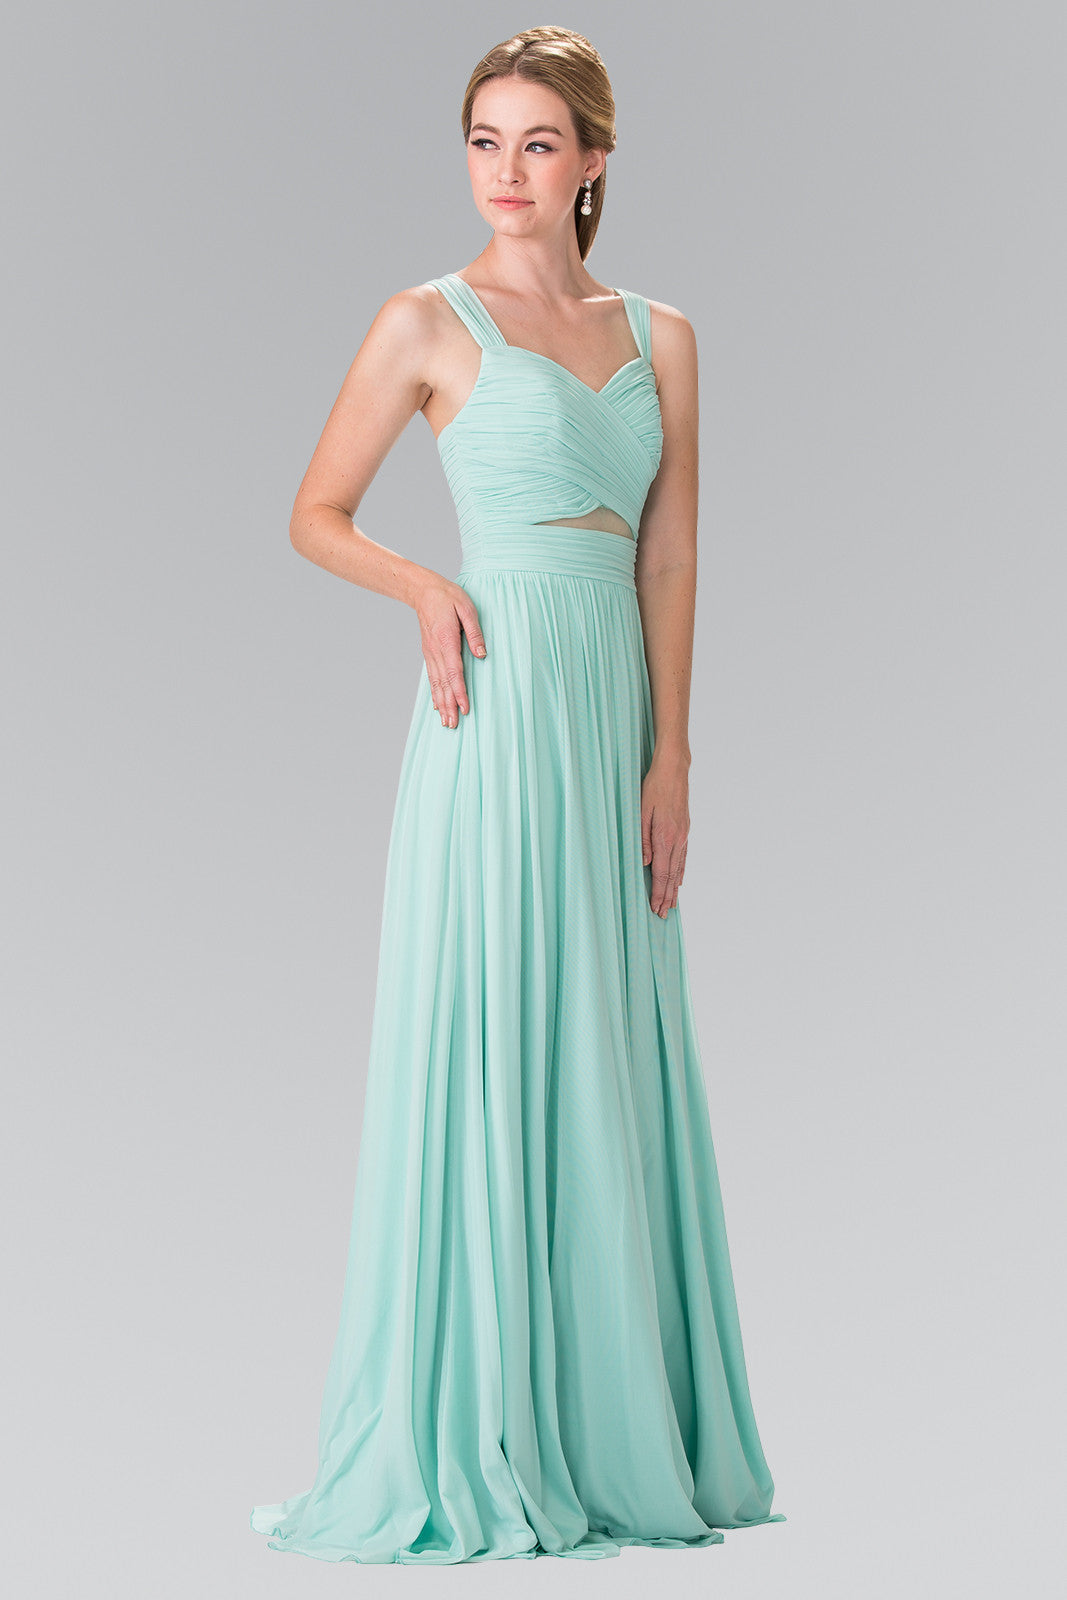 Floor Length Audrey Bridesmaid Chiffon dress Prom Evening Gown in 5 co ...